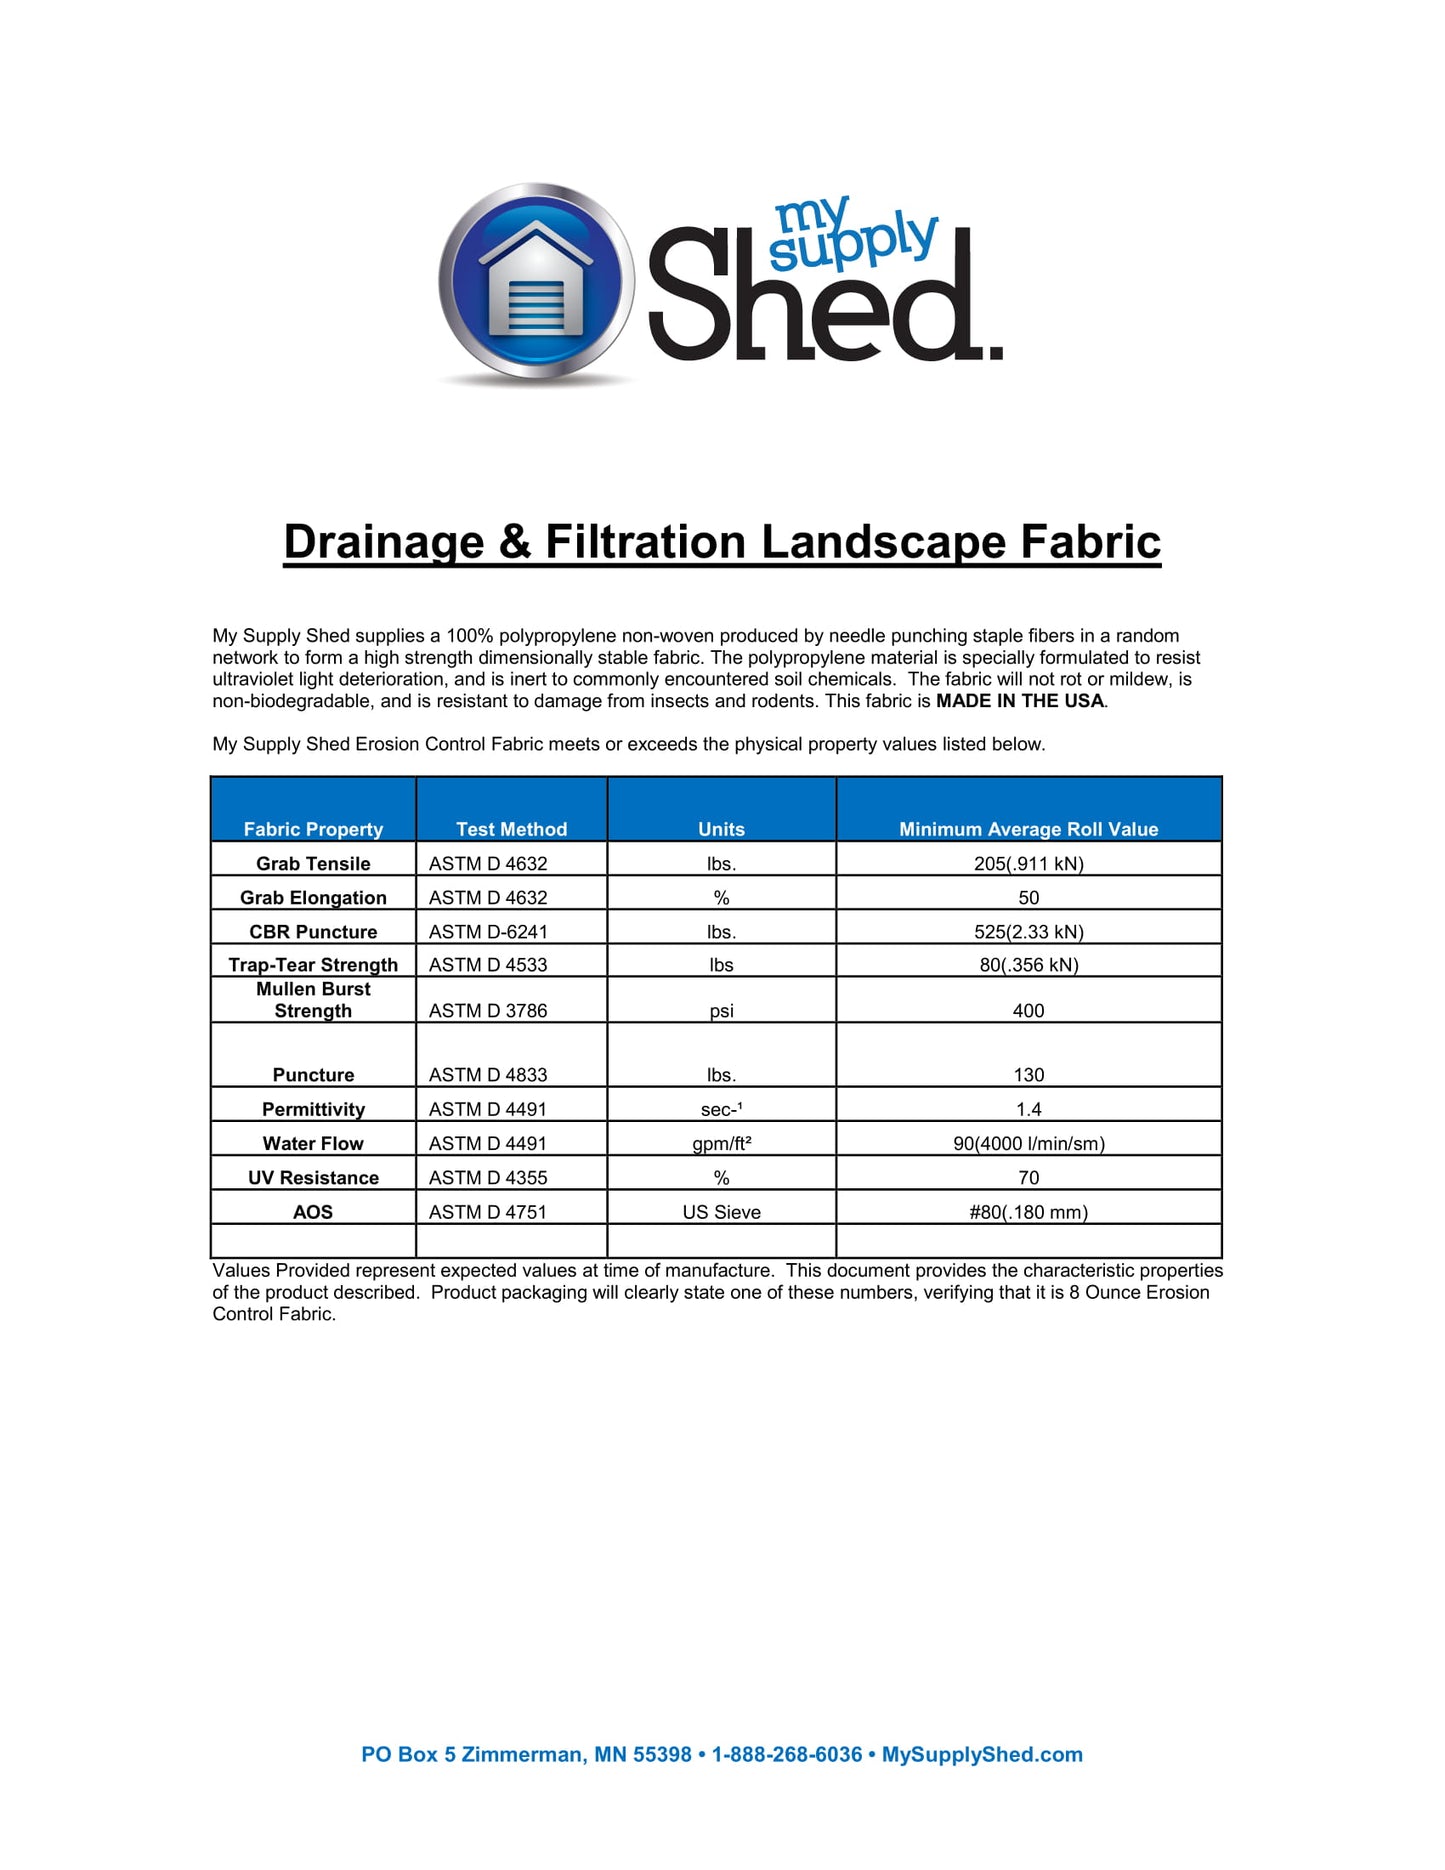 My Supply Shed Drainage & Filtration Landscape Fabric (8oz)